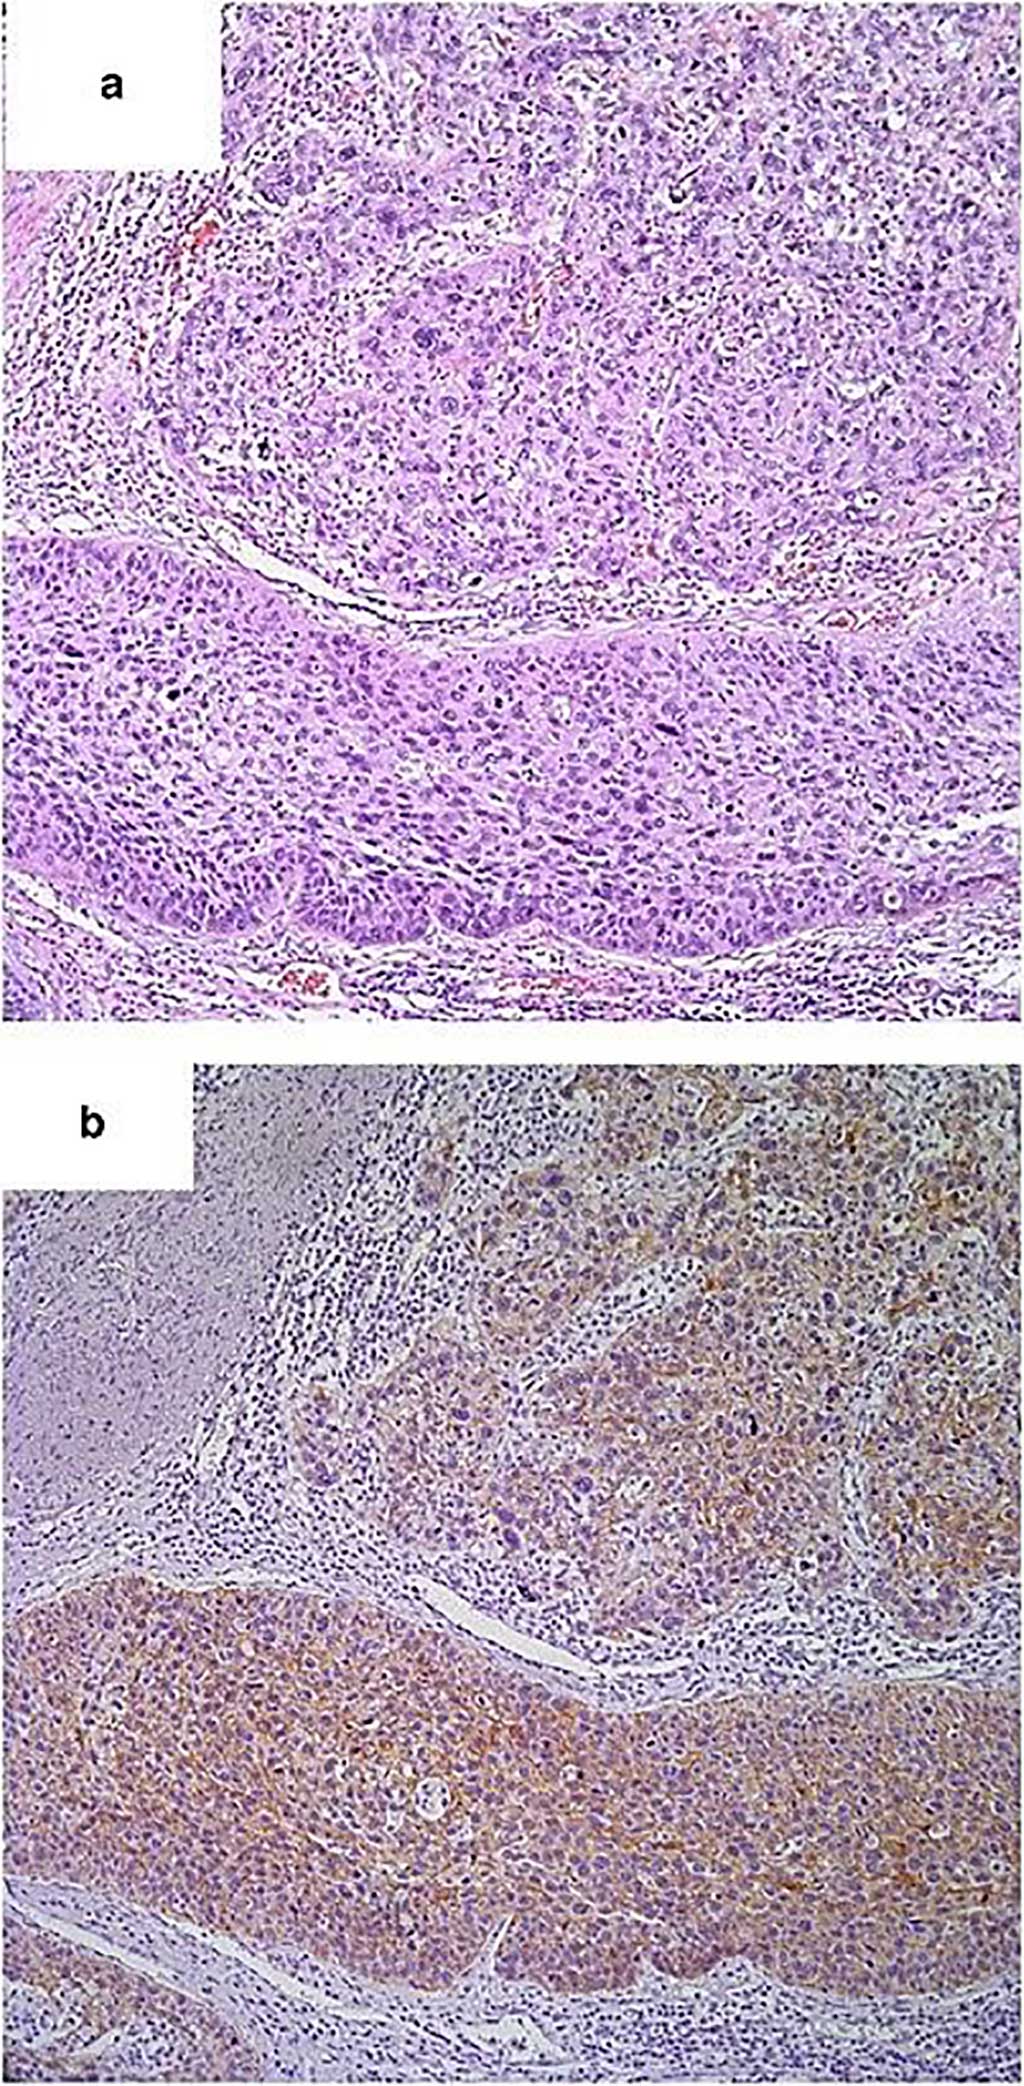 Image: Histopathology of (a) Usual-type high-grade urothelial carcinoma and (b) Positive E-cadherin expression in usual-type high-grade urothelial carcinoma. (Photo courtesy of Emory University School of Medicine)